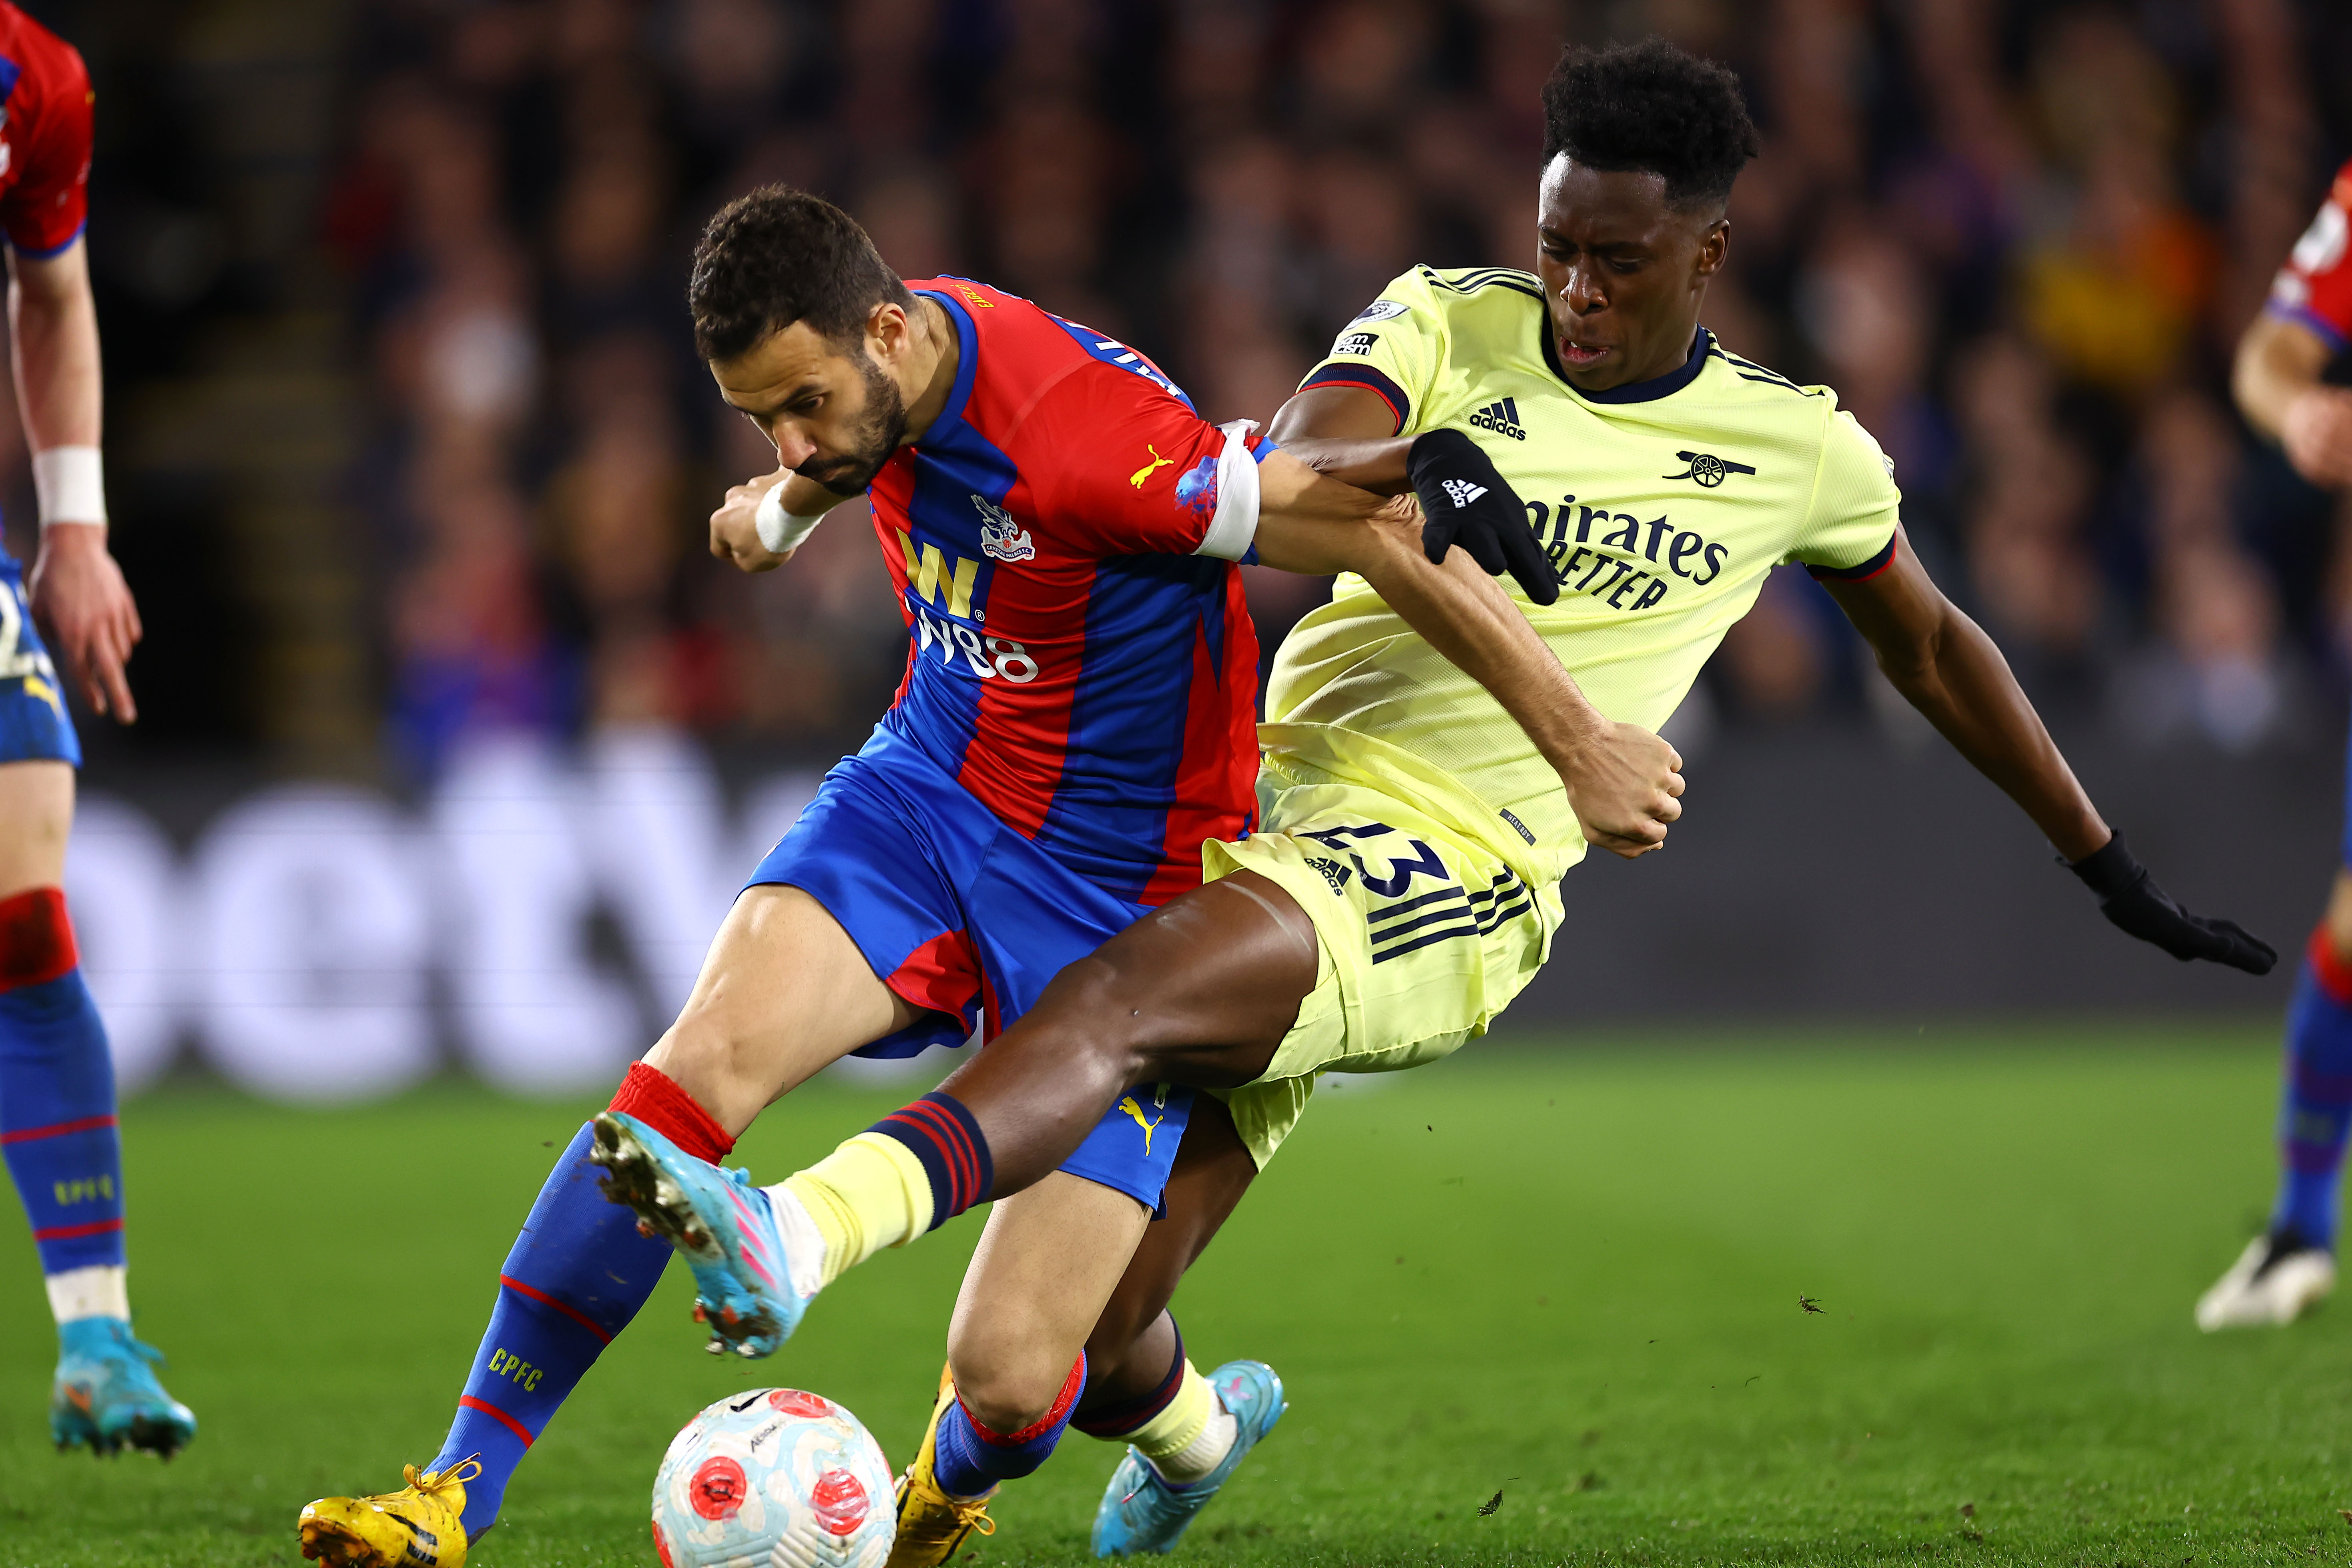 Lowell Hornby: A disappointing night at the Palace as Arsenal capitulate at Selhurst